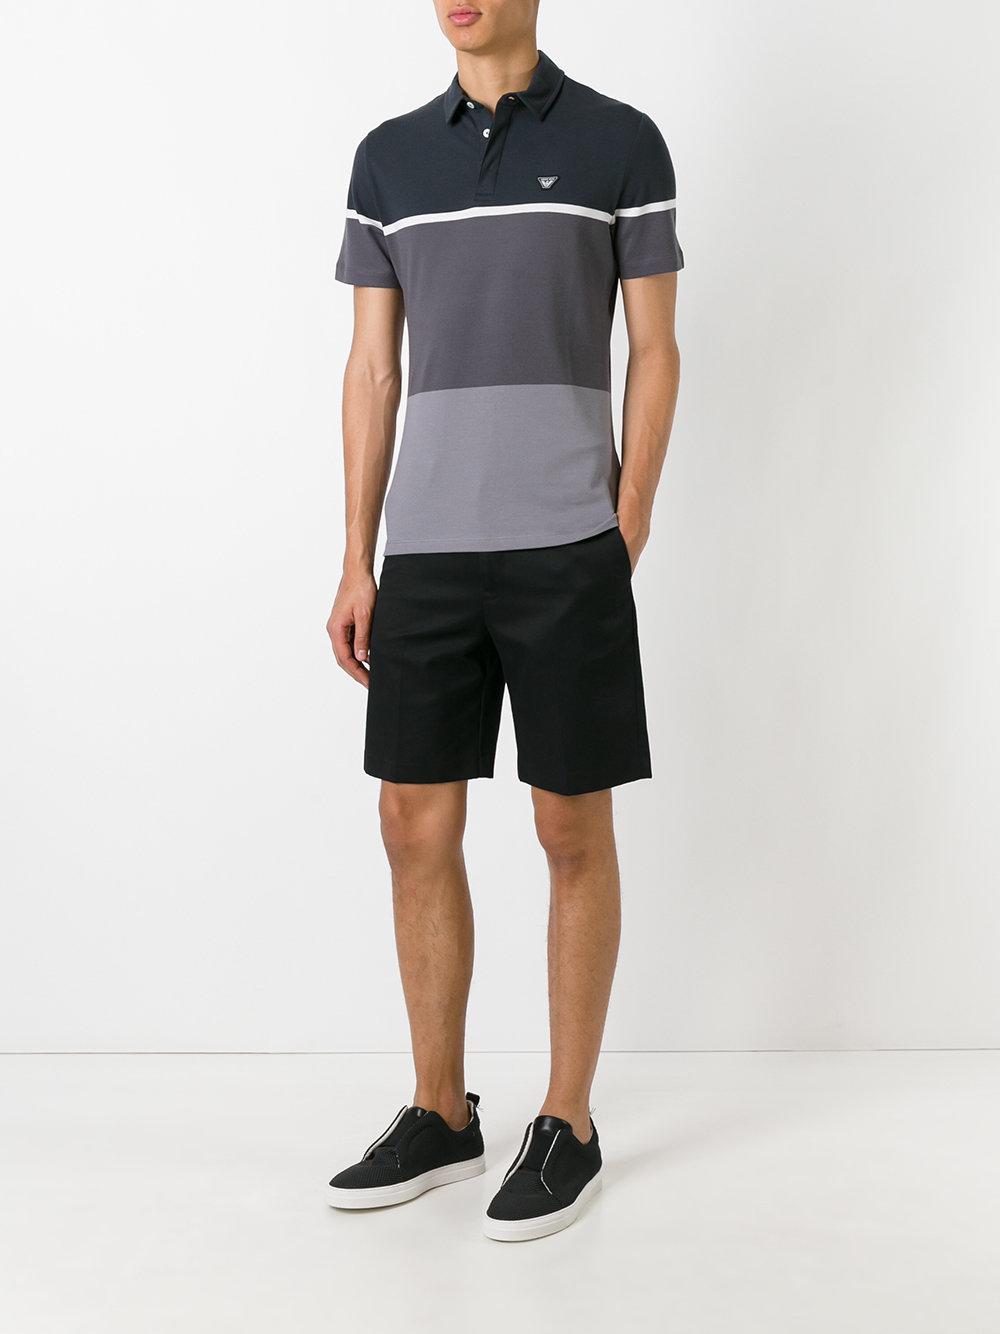 Lyst - Armani Jeans Colour Block Polo Shirt in Gray for Men